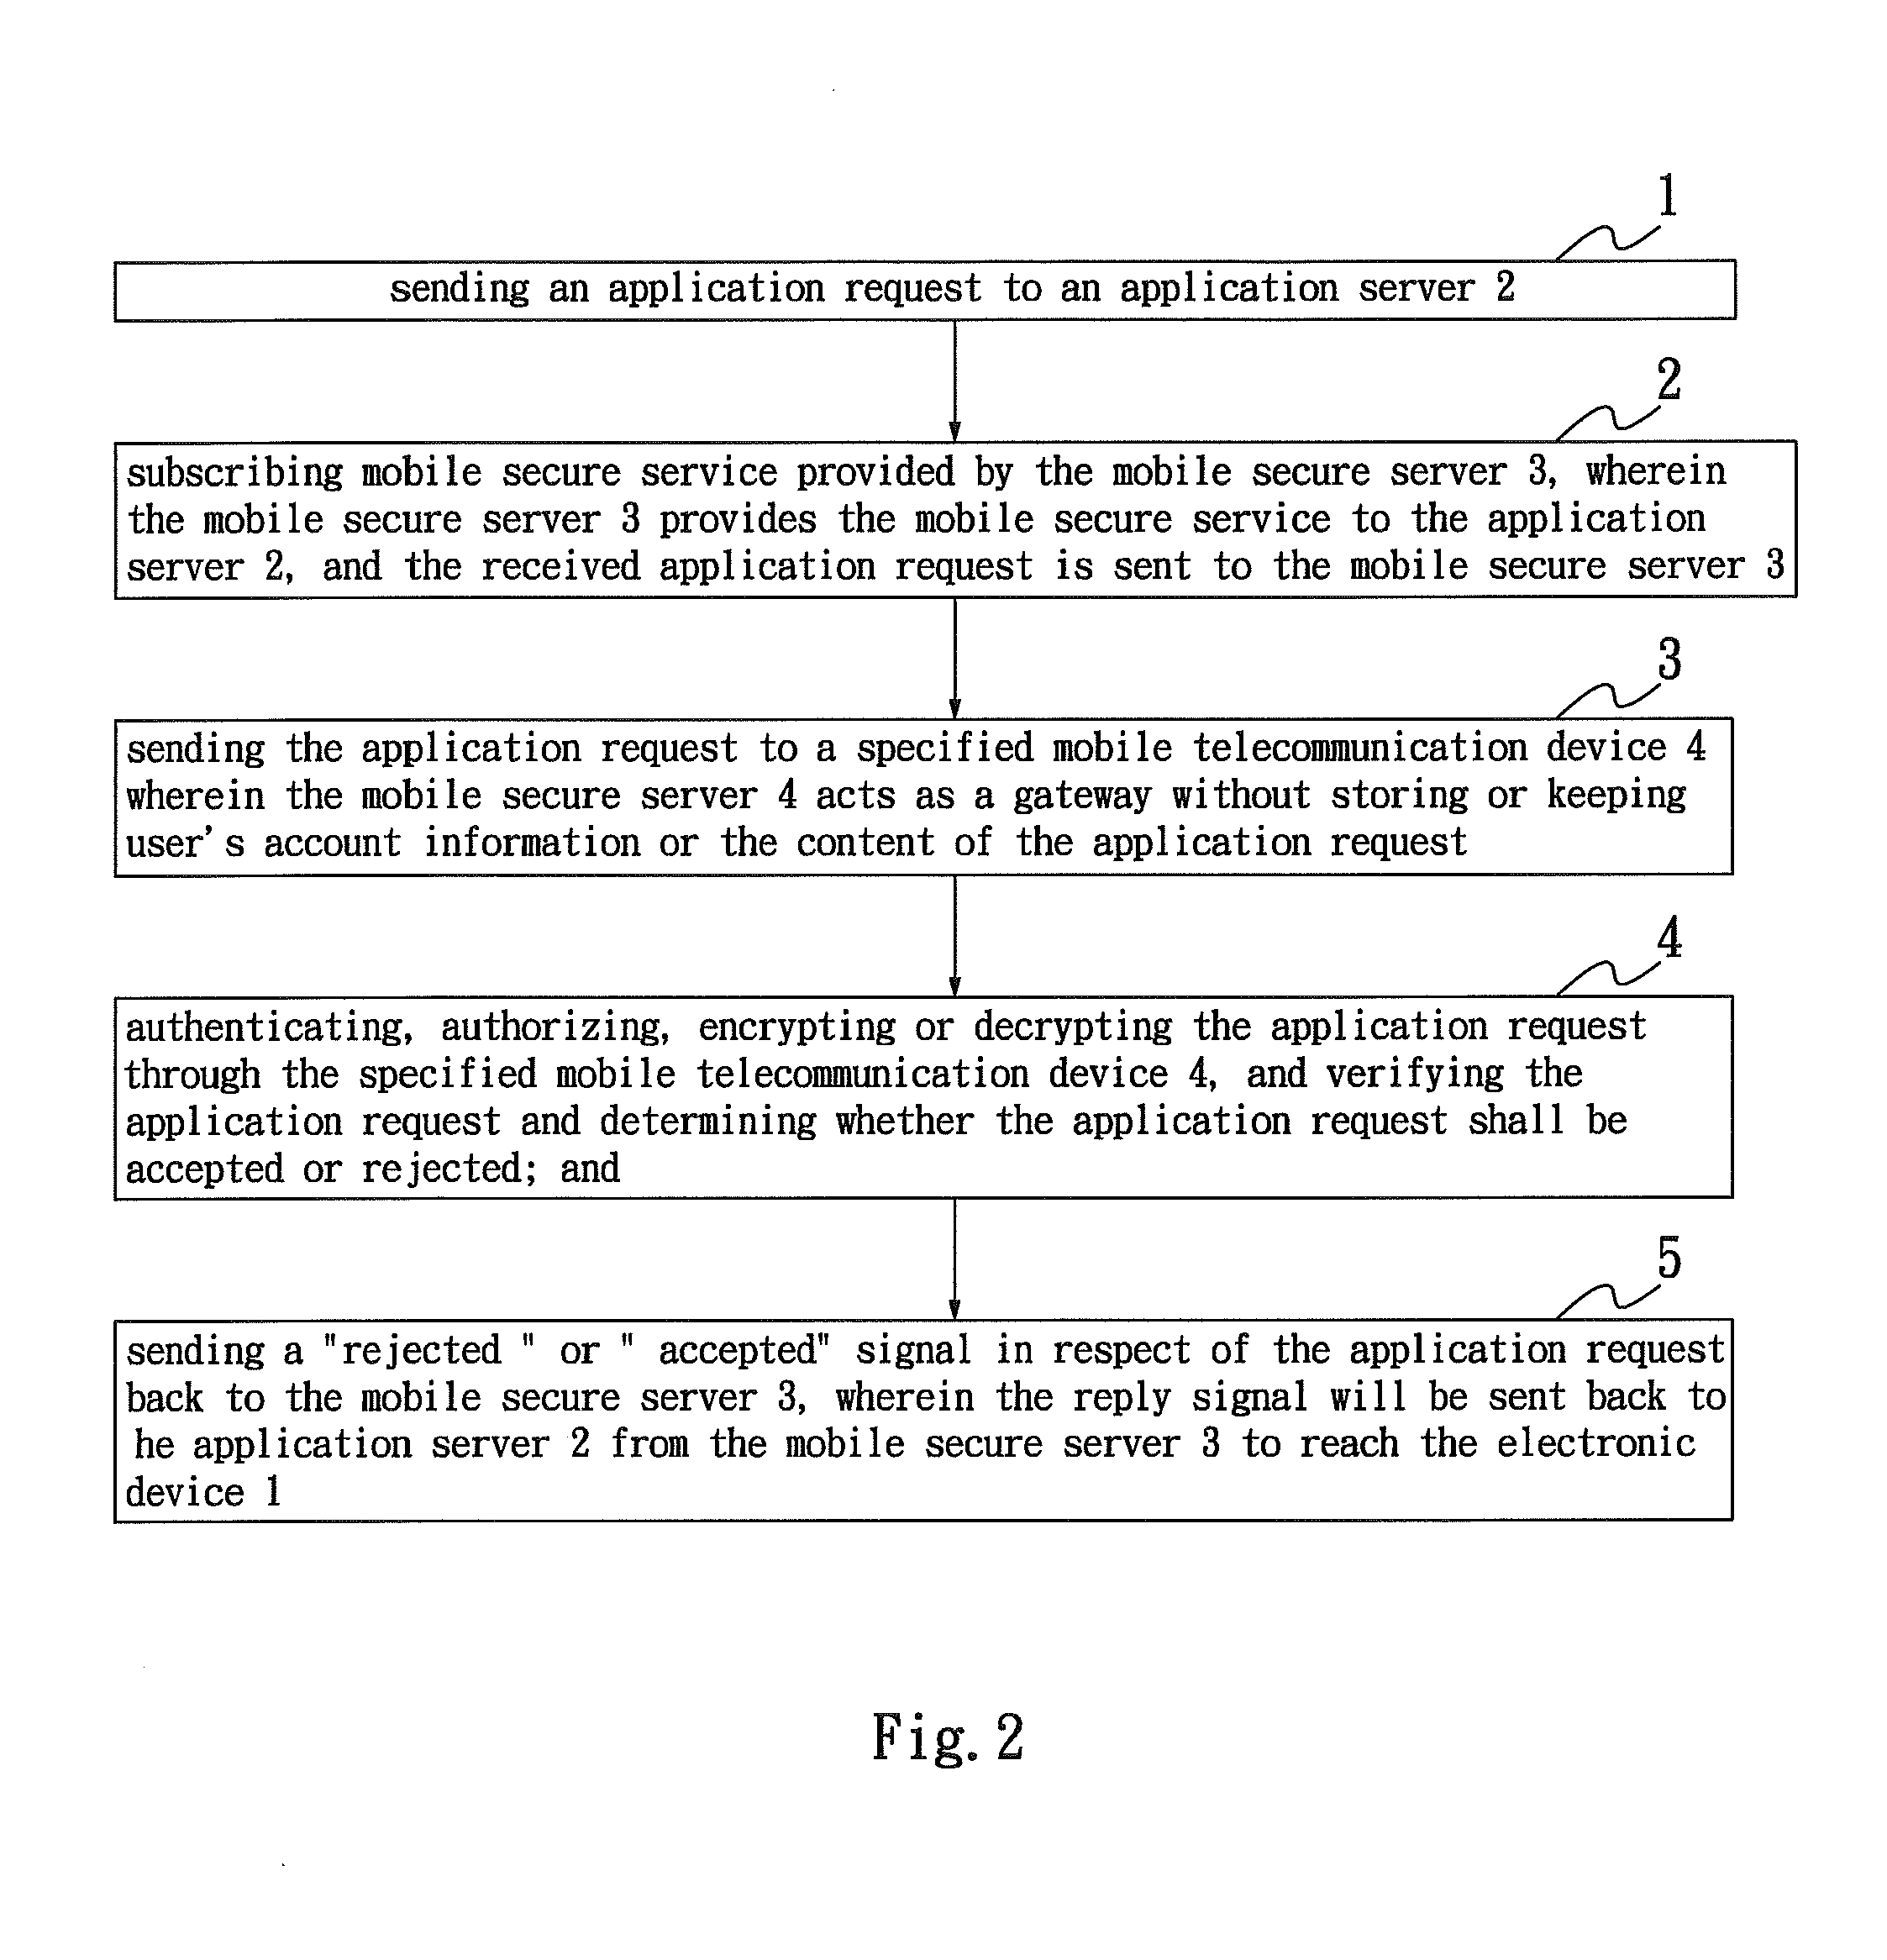 Method of authenticating, authorizing, encrypting and decrypting via mobile service